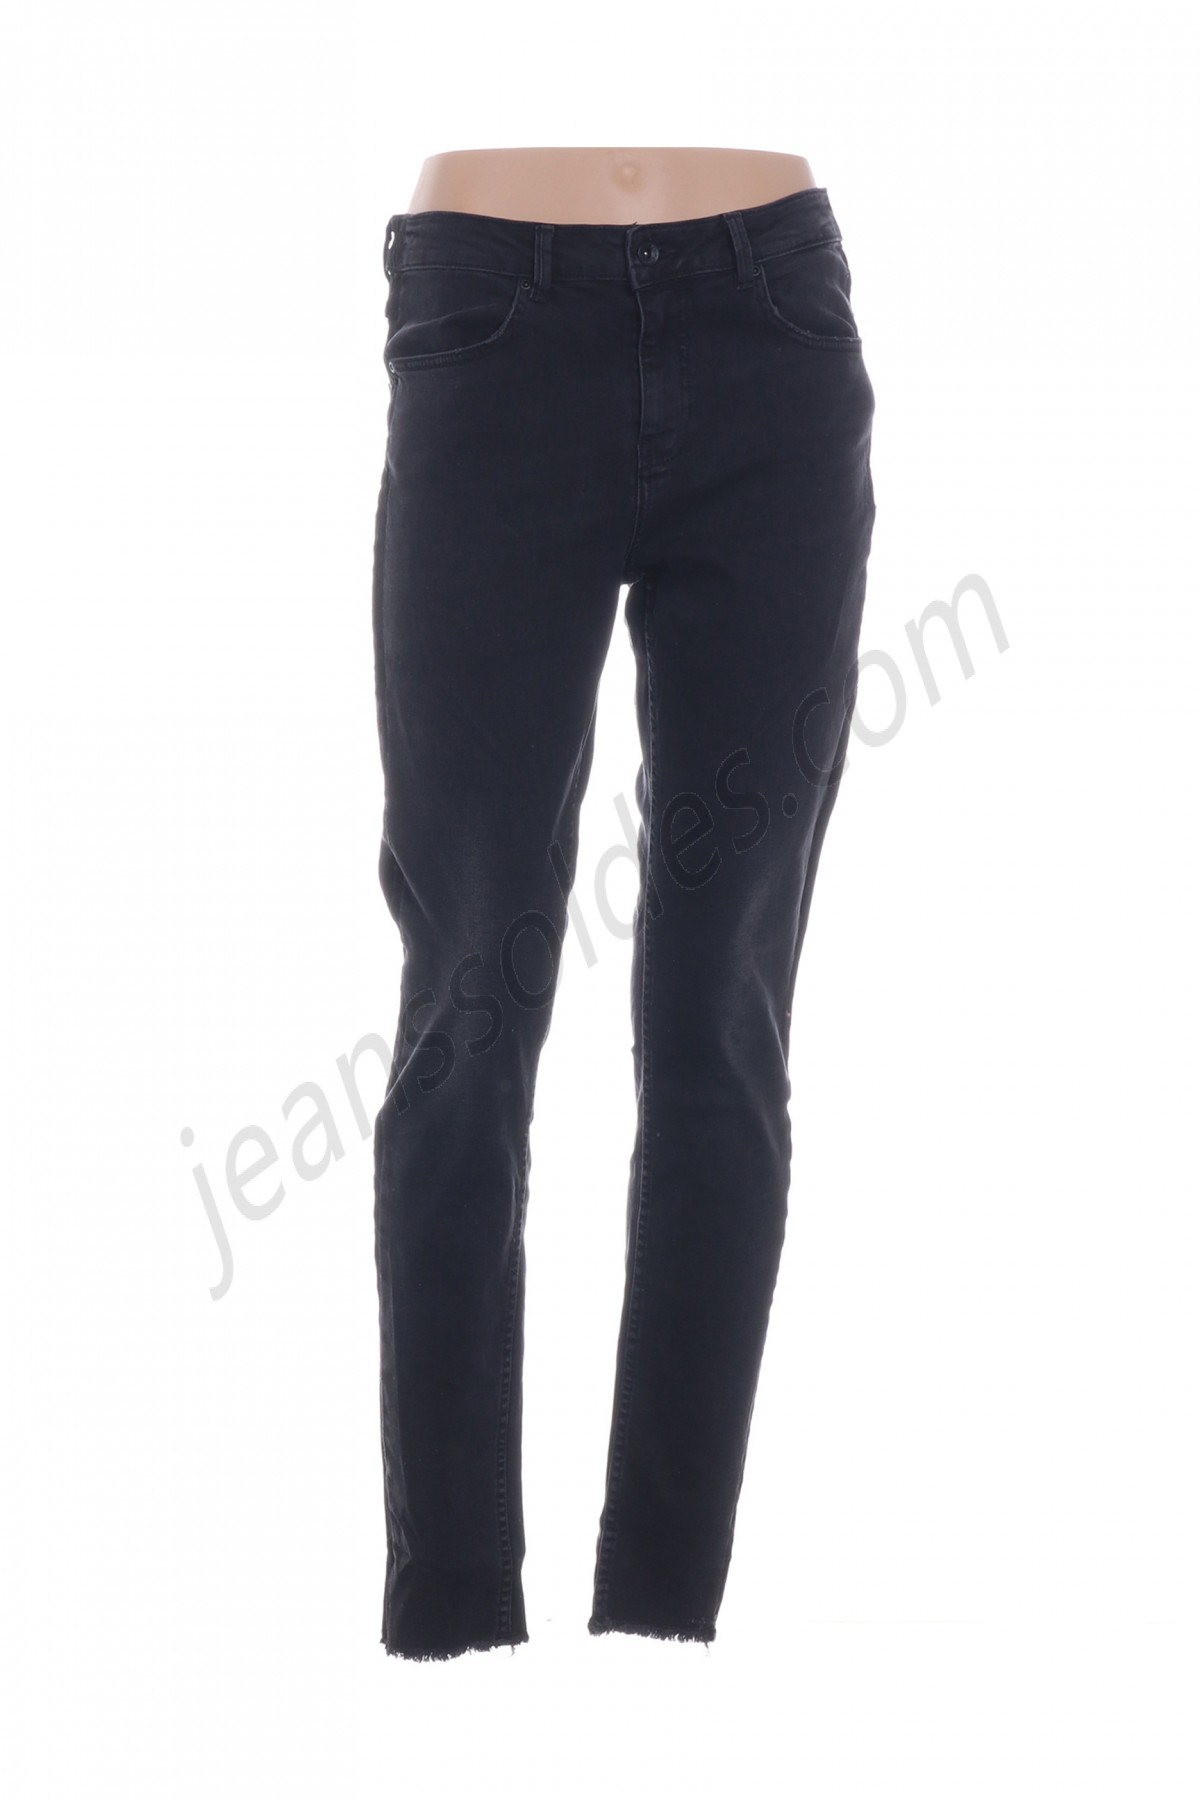 b.young-Jeans coupe slim prix d’amis - -0